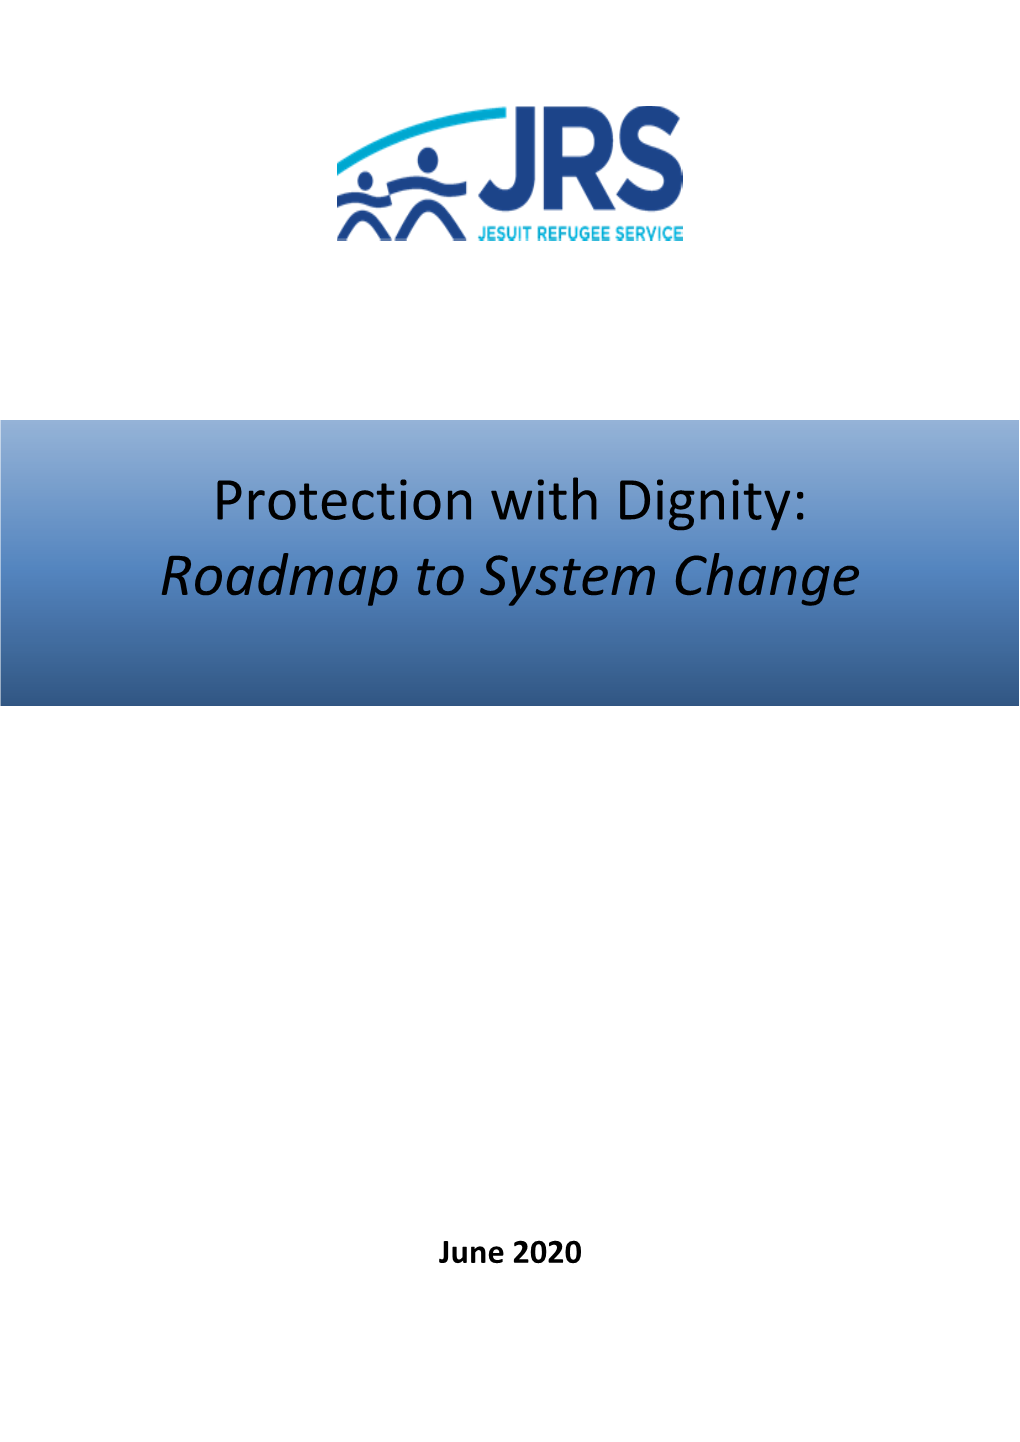 Protection with Dignity: Roadmap to System Change